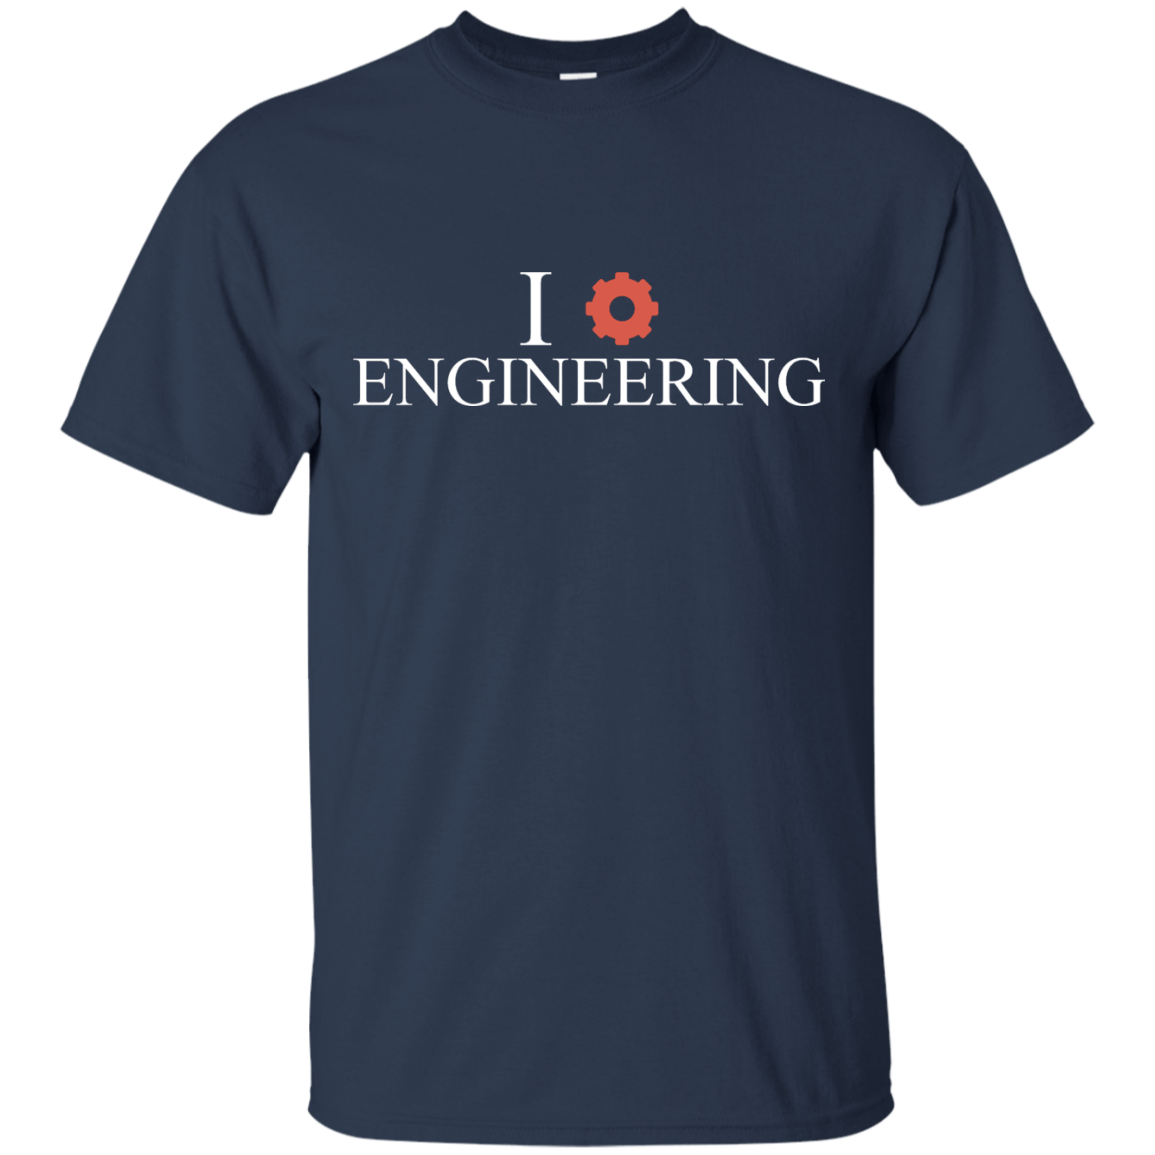 I Gear Engineering - Engineering Outfitters